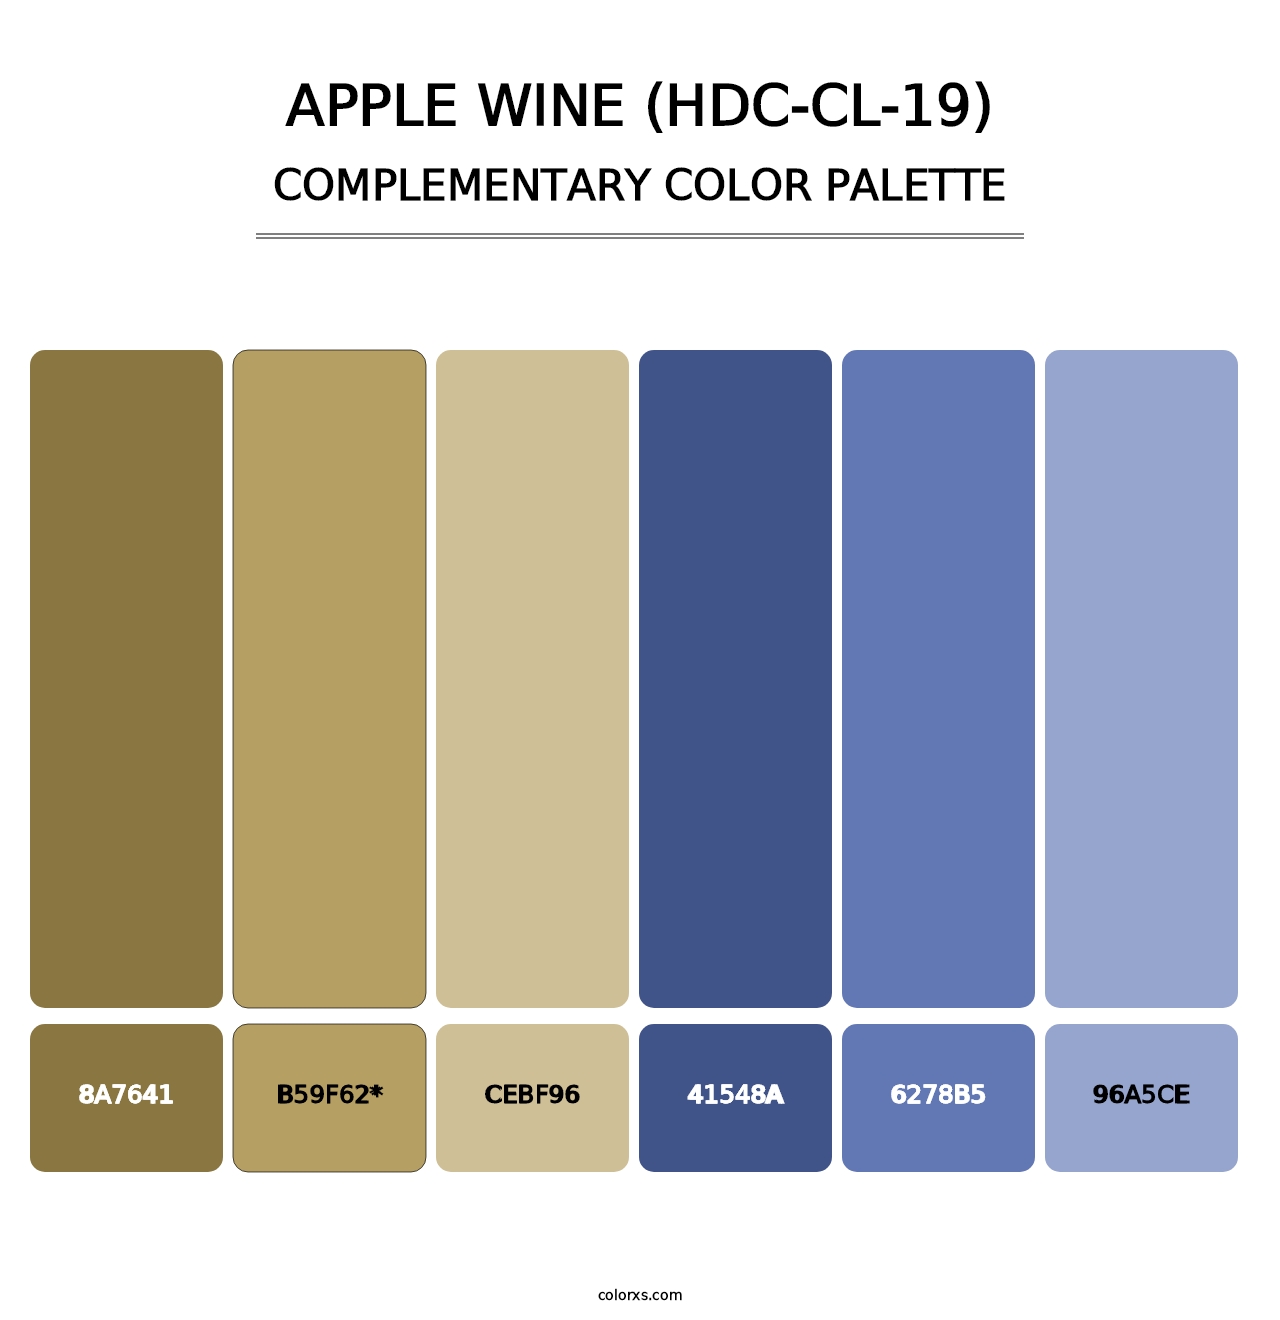 Apple Wine (HDC-CL-19) - Complementary Color Palette